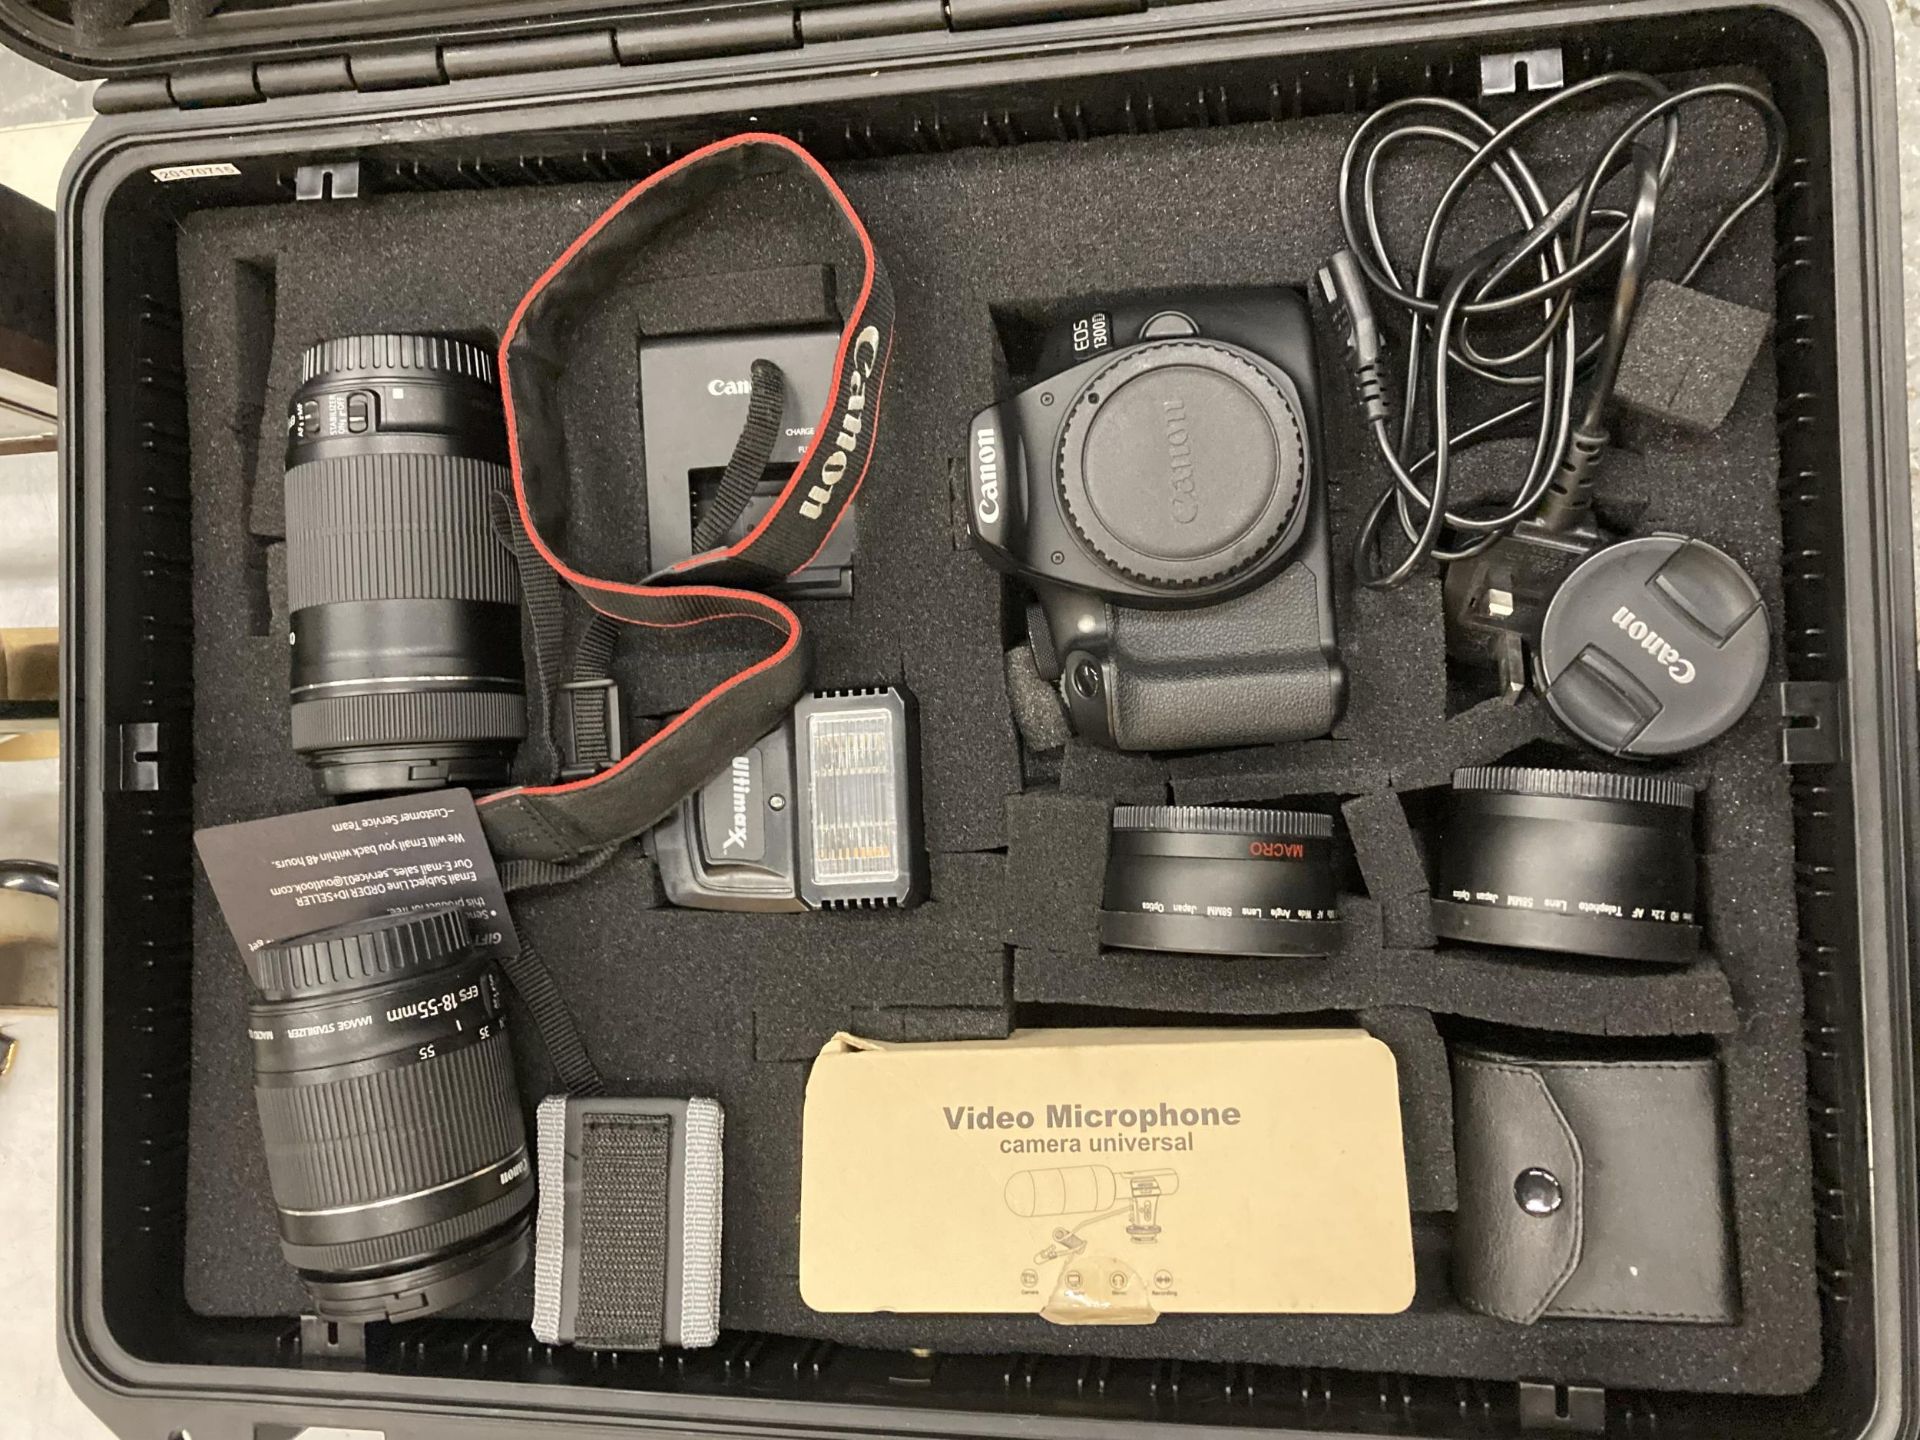 A BOXED CANON EOS 1300D CAMERA WITH LENS', FLASH AND FURTHER ACCESSORIES